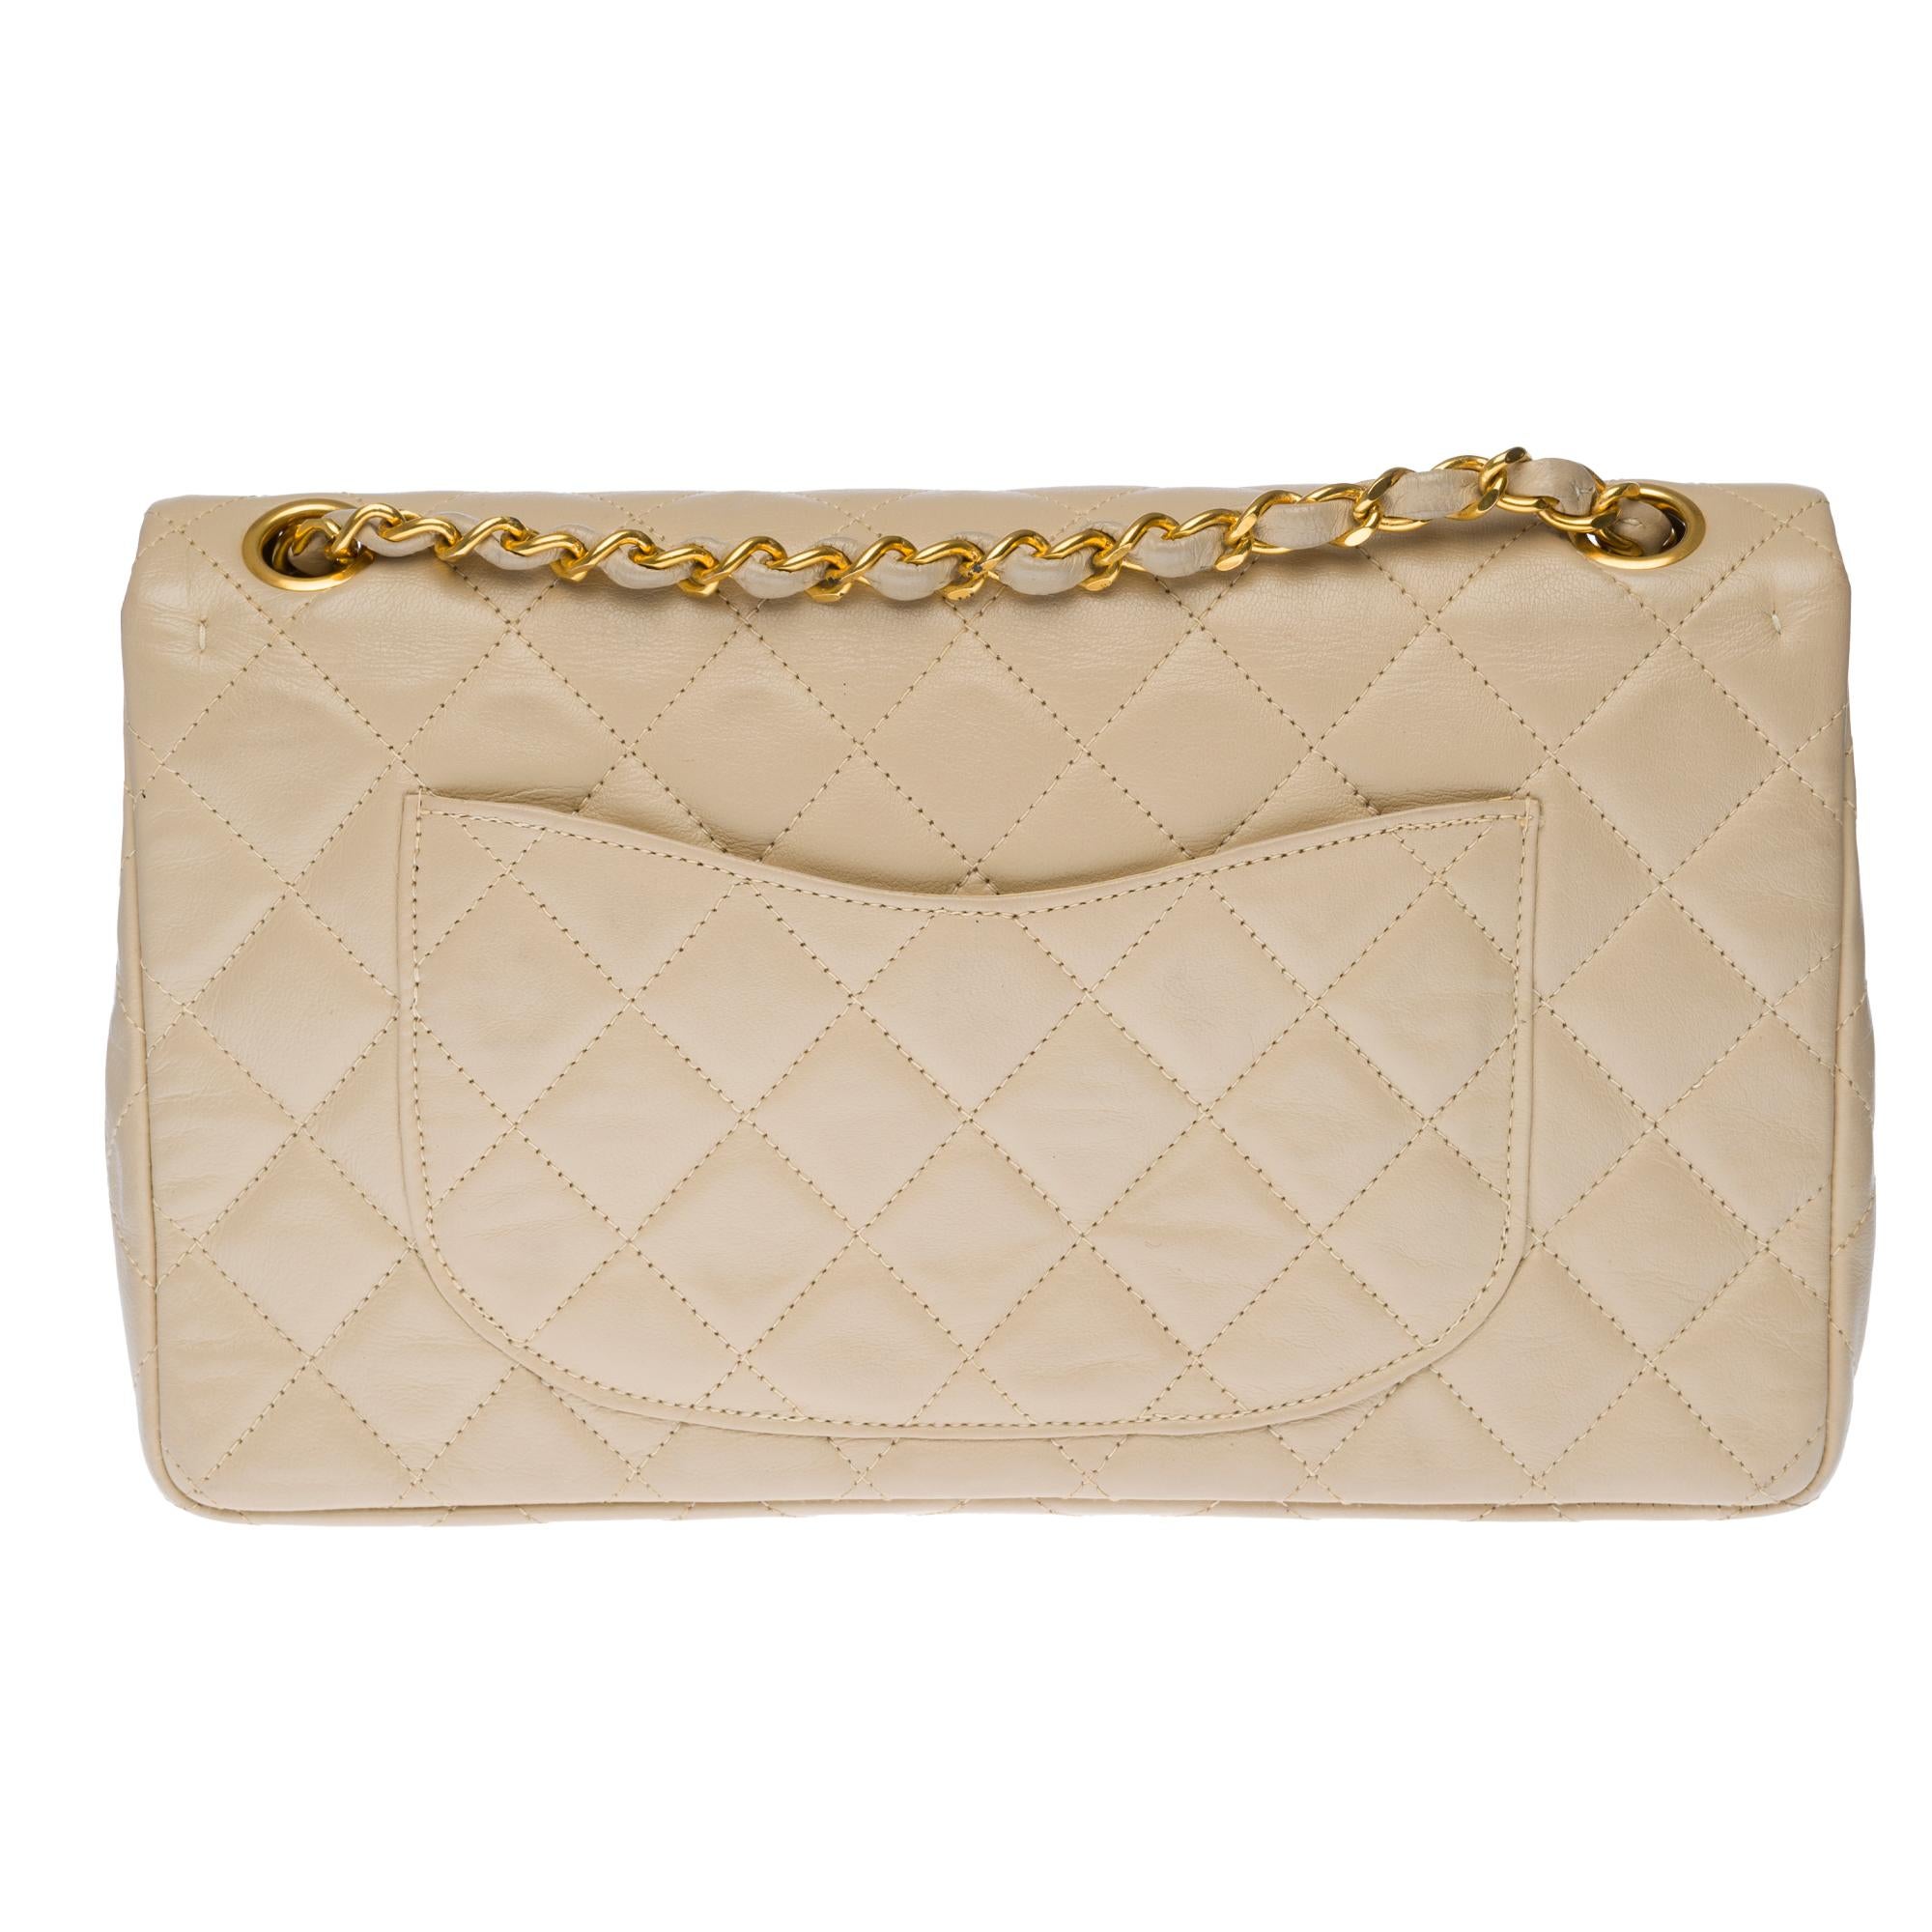 Beautiful Chanel Timeless/Classique handbag with double flap in beige quilted lambskin leather, gold-tone metal hardware, a gold-tone metal chain handle intertwined with beige leather allowing a hand or shoulder support.

Closure with gold metal